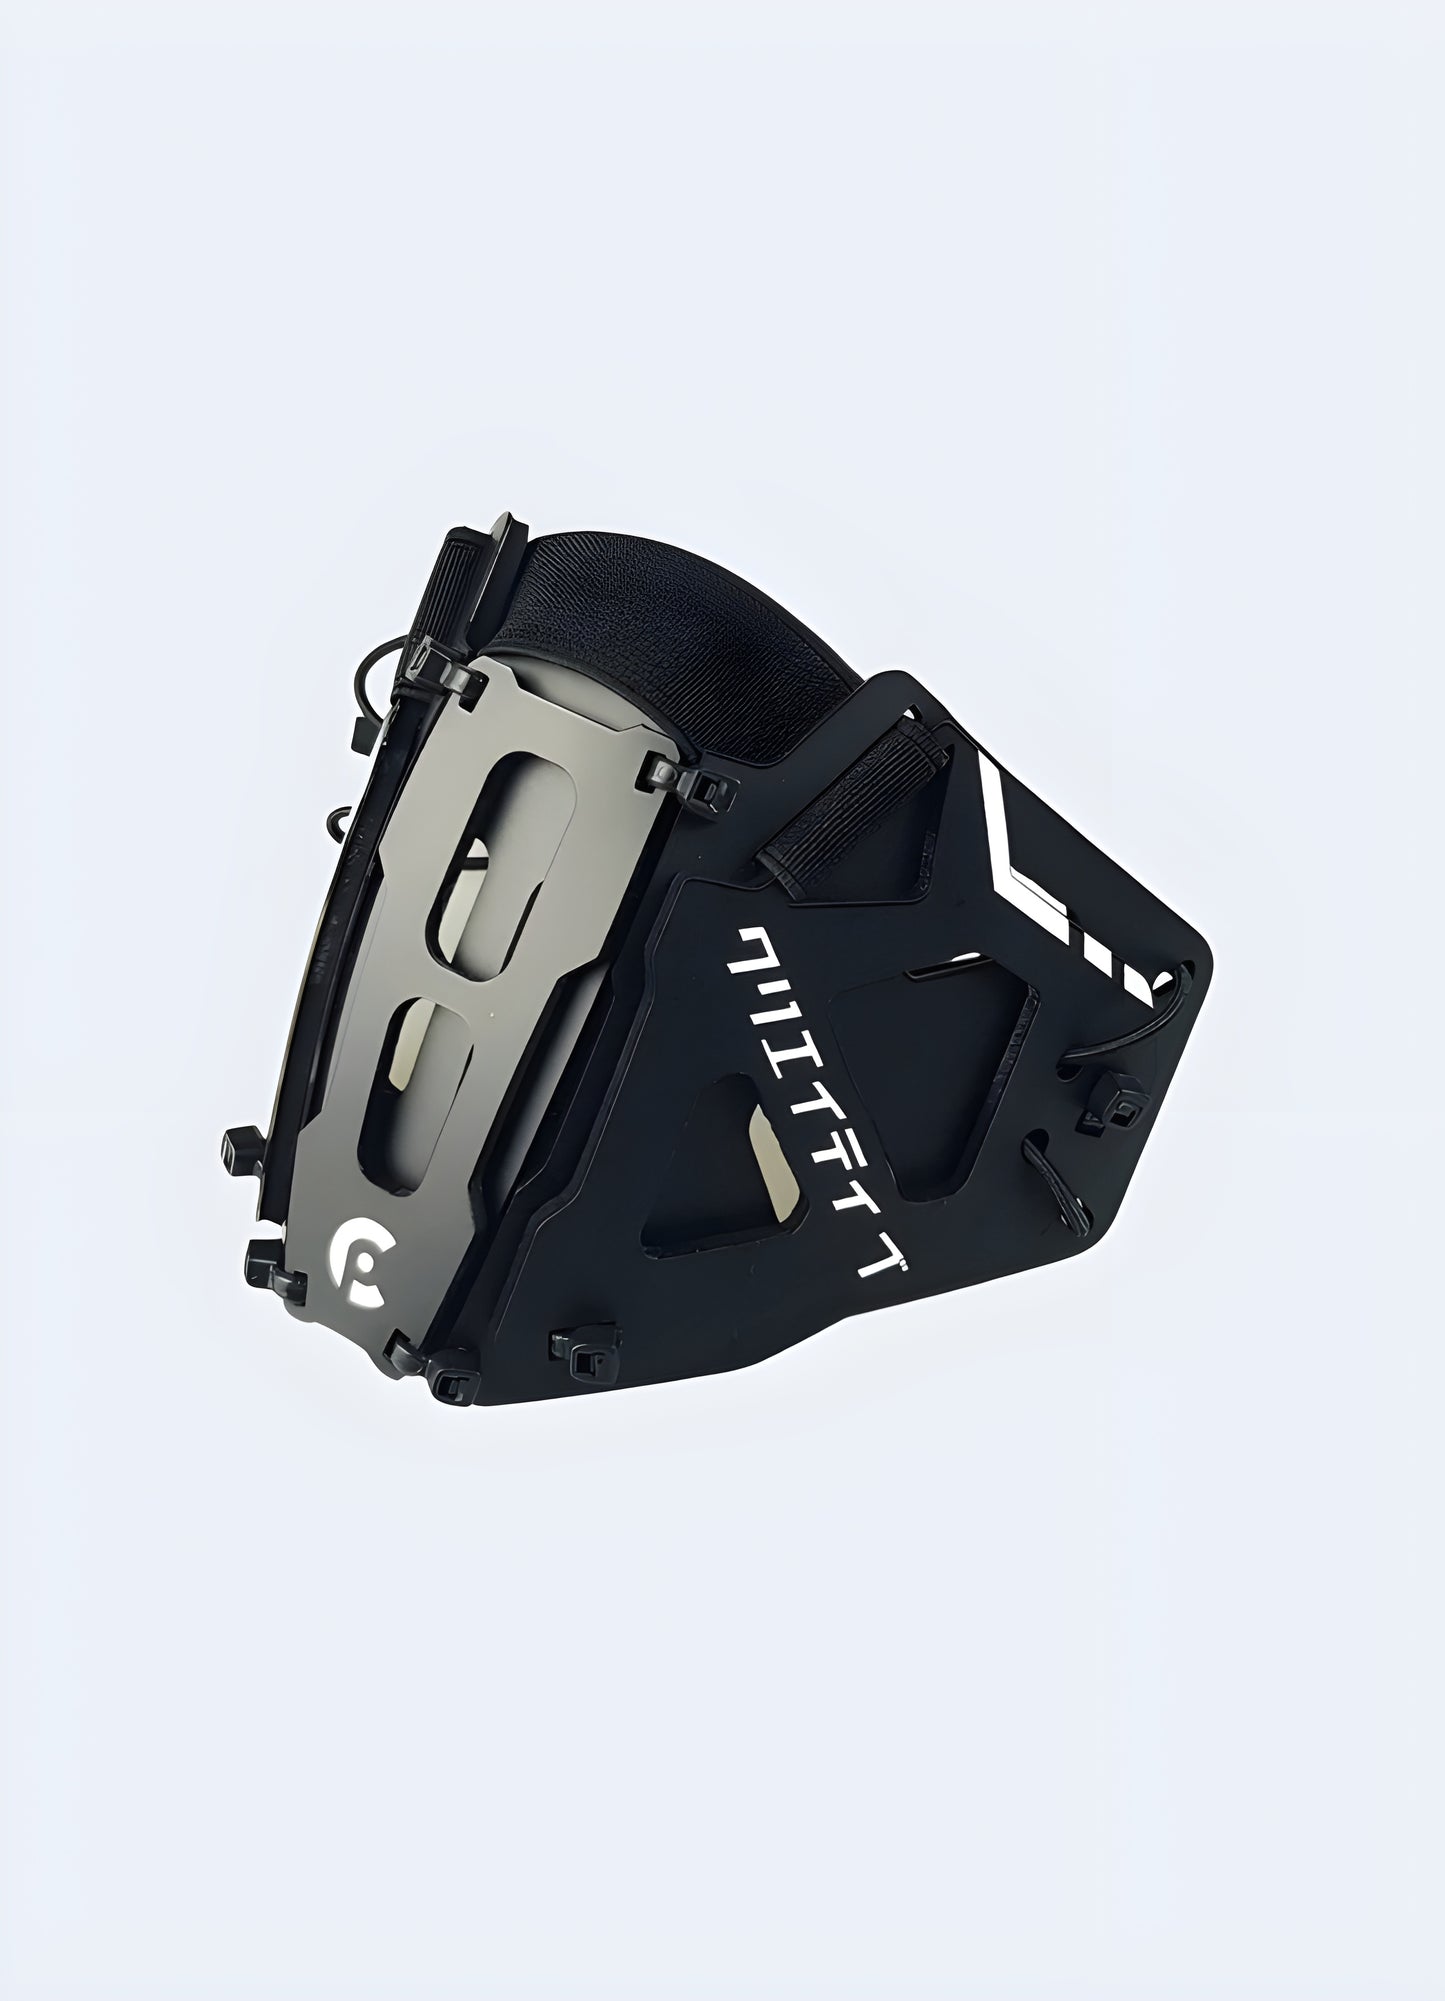 Our sleek, fashion-forward techwear mask offers more than just high performance and high sophistication.